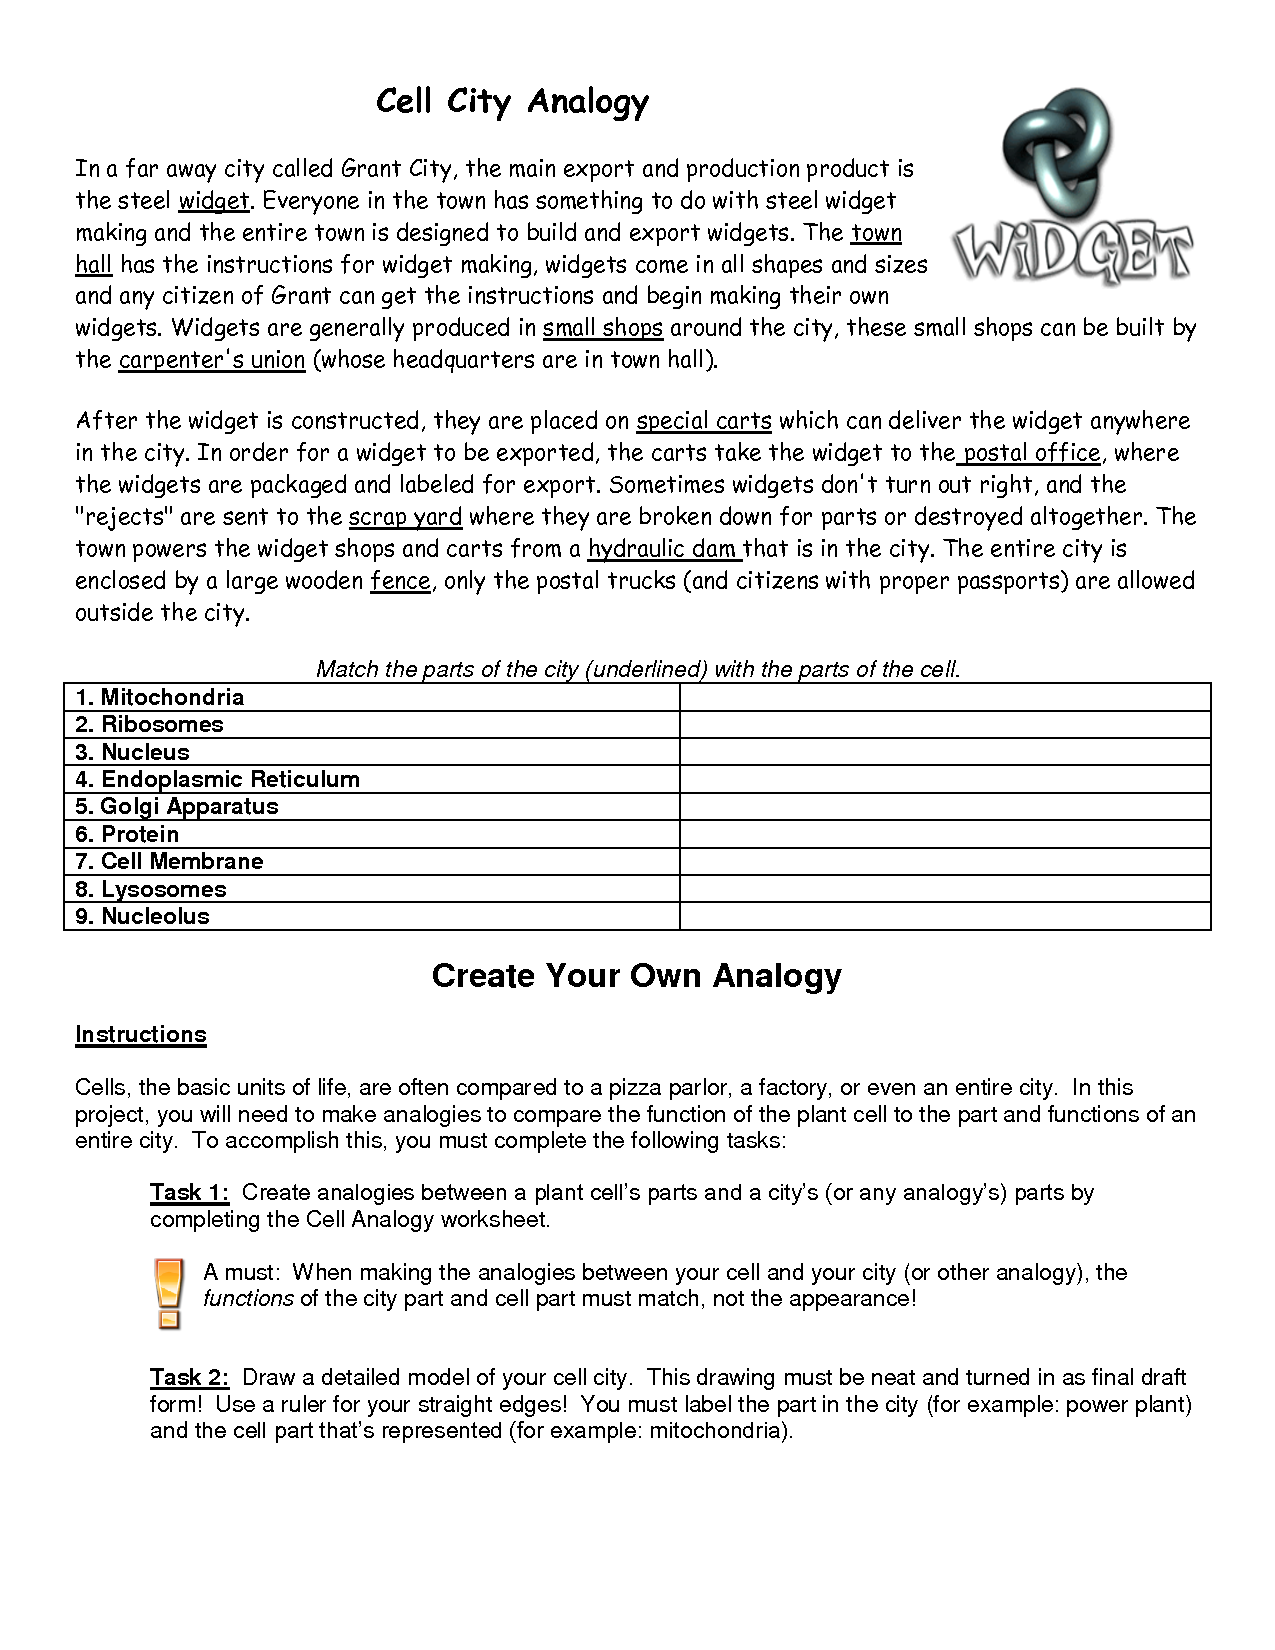 Cell City Analogy Worksheet Answers Image